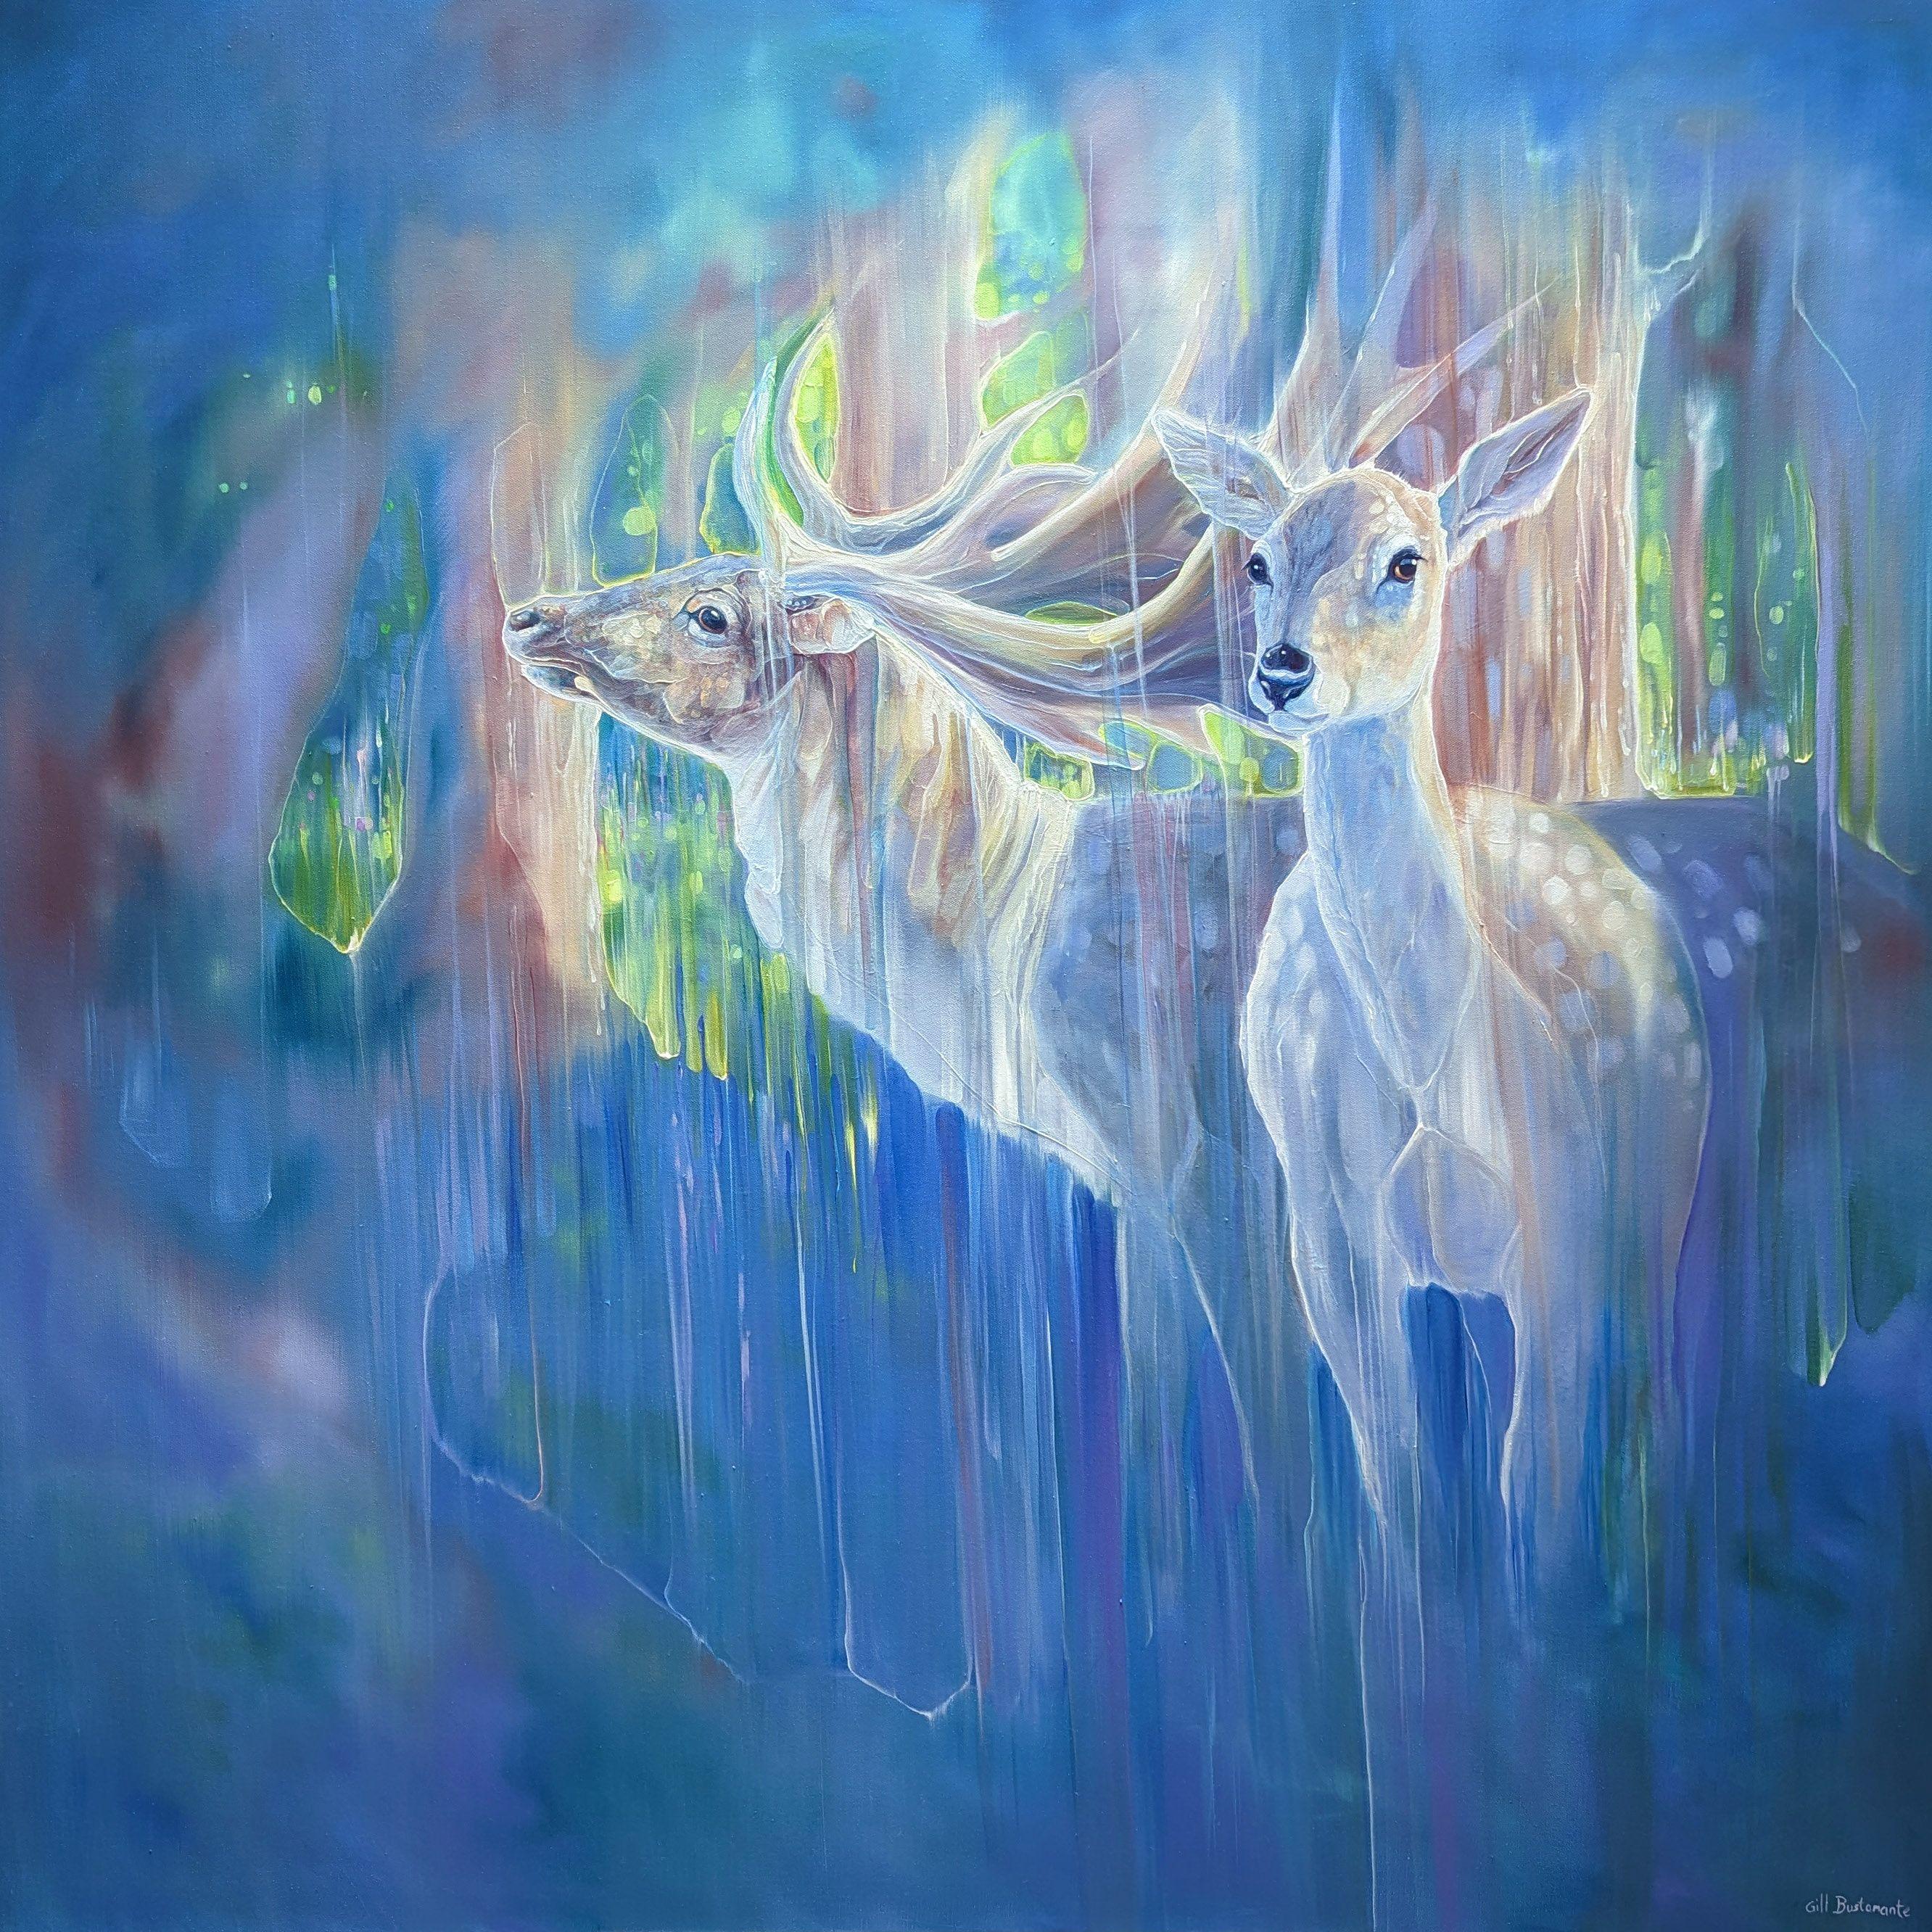 Divine Monarchs is a large semi-abstract wildlife painting of two deer in a bluebell wood in springtime. It is 48x48x1.5 inches. The painting was inspired by the months of April and May when the woodlands become carpeted in bluebells. I rarely spot